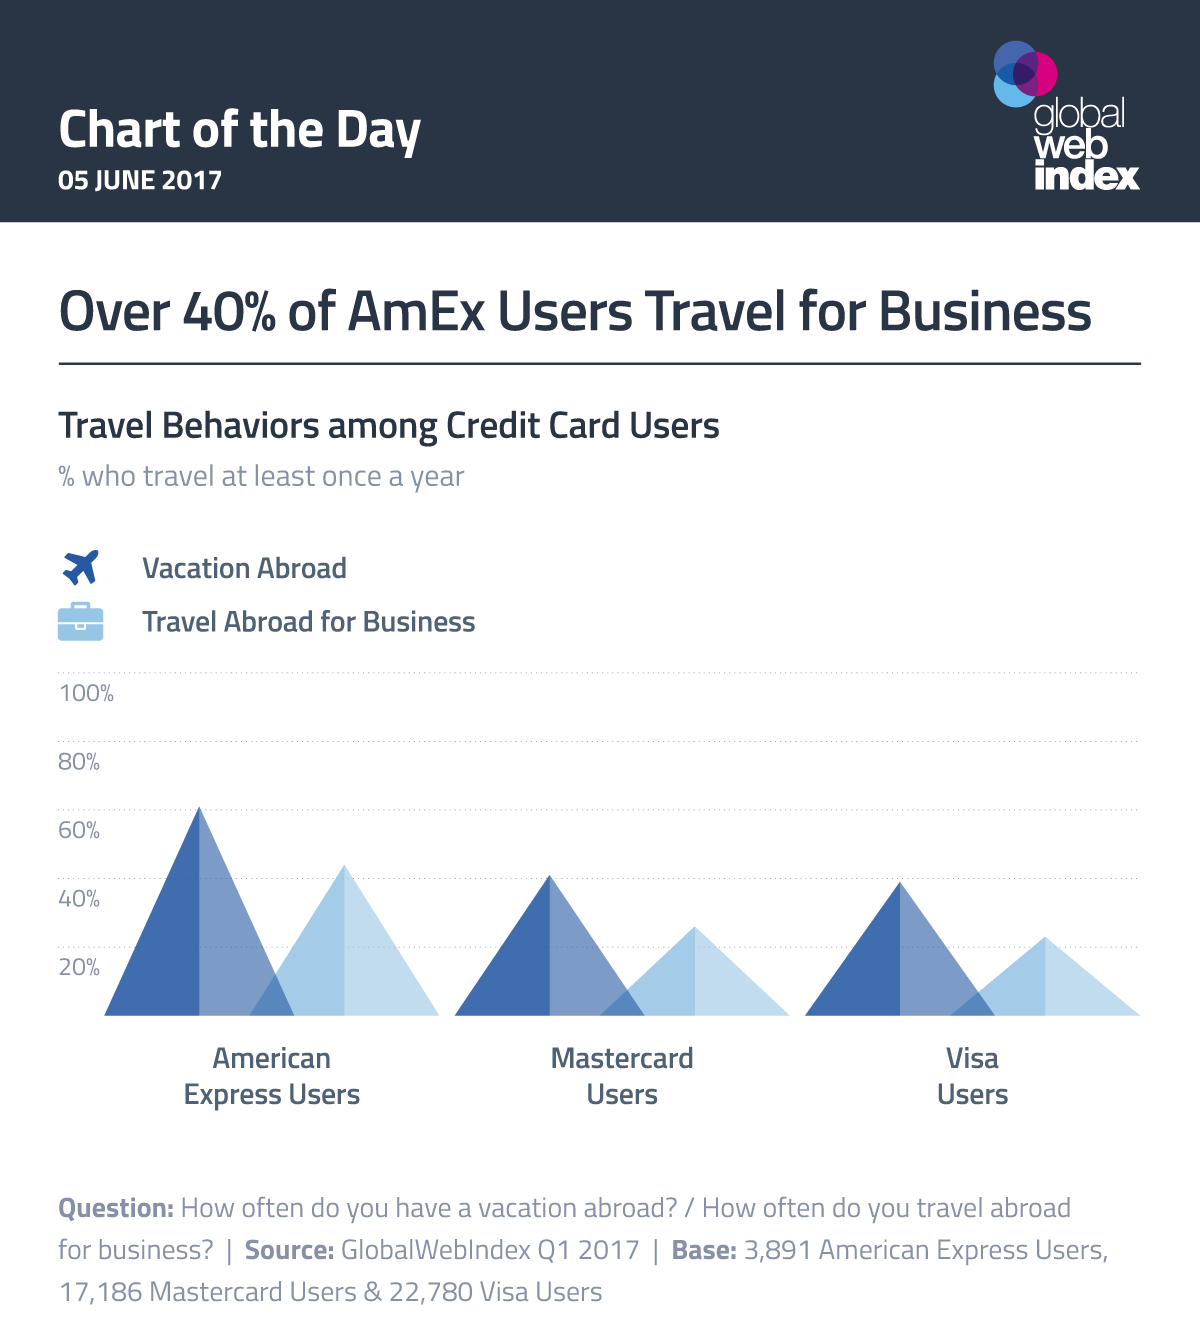 Over 40% of AmEx Users Travel for Business